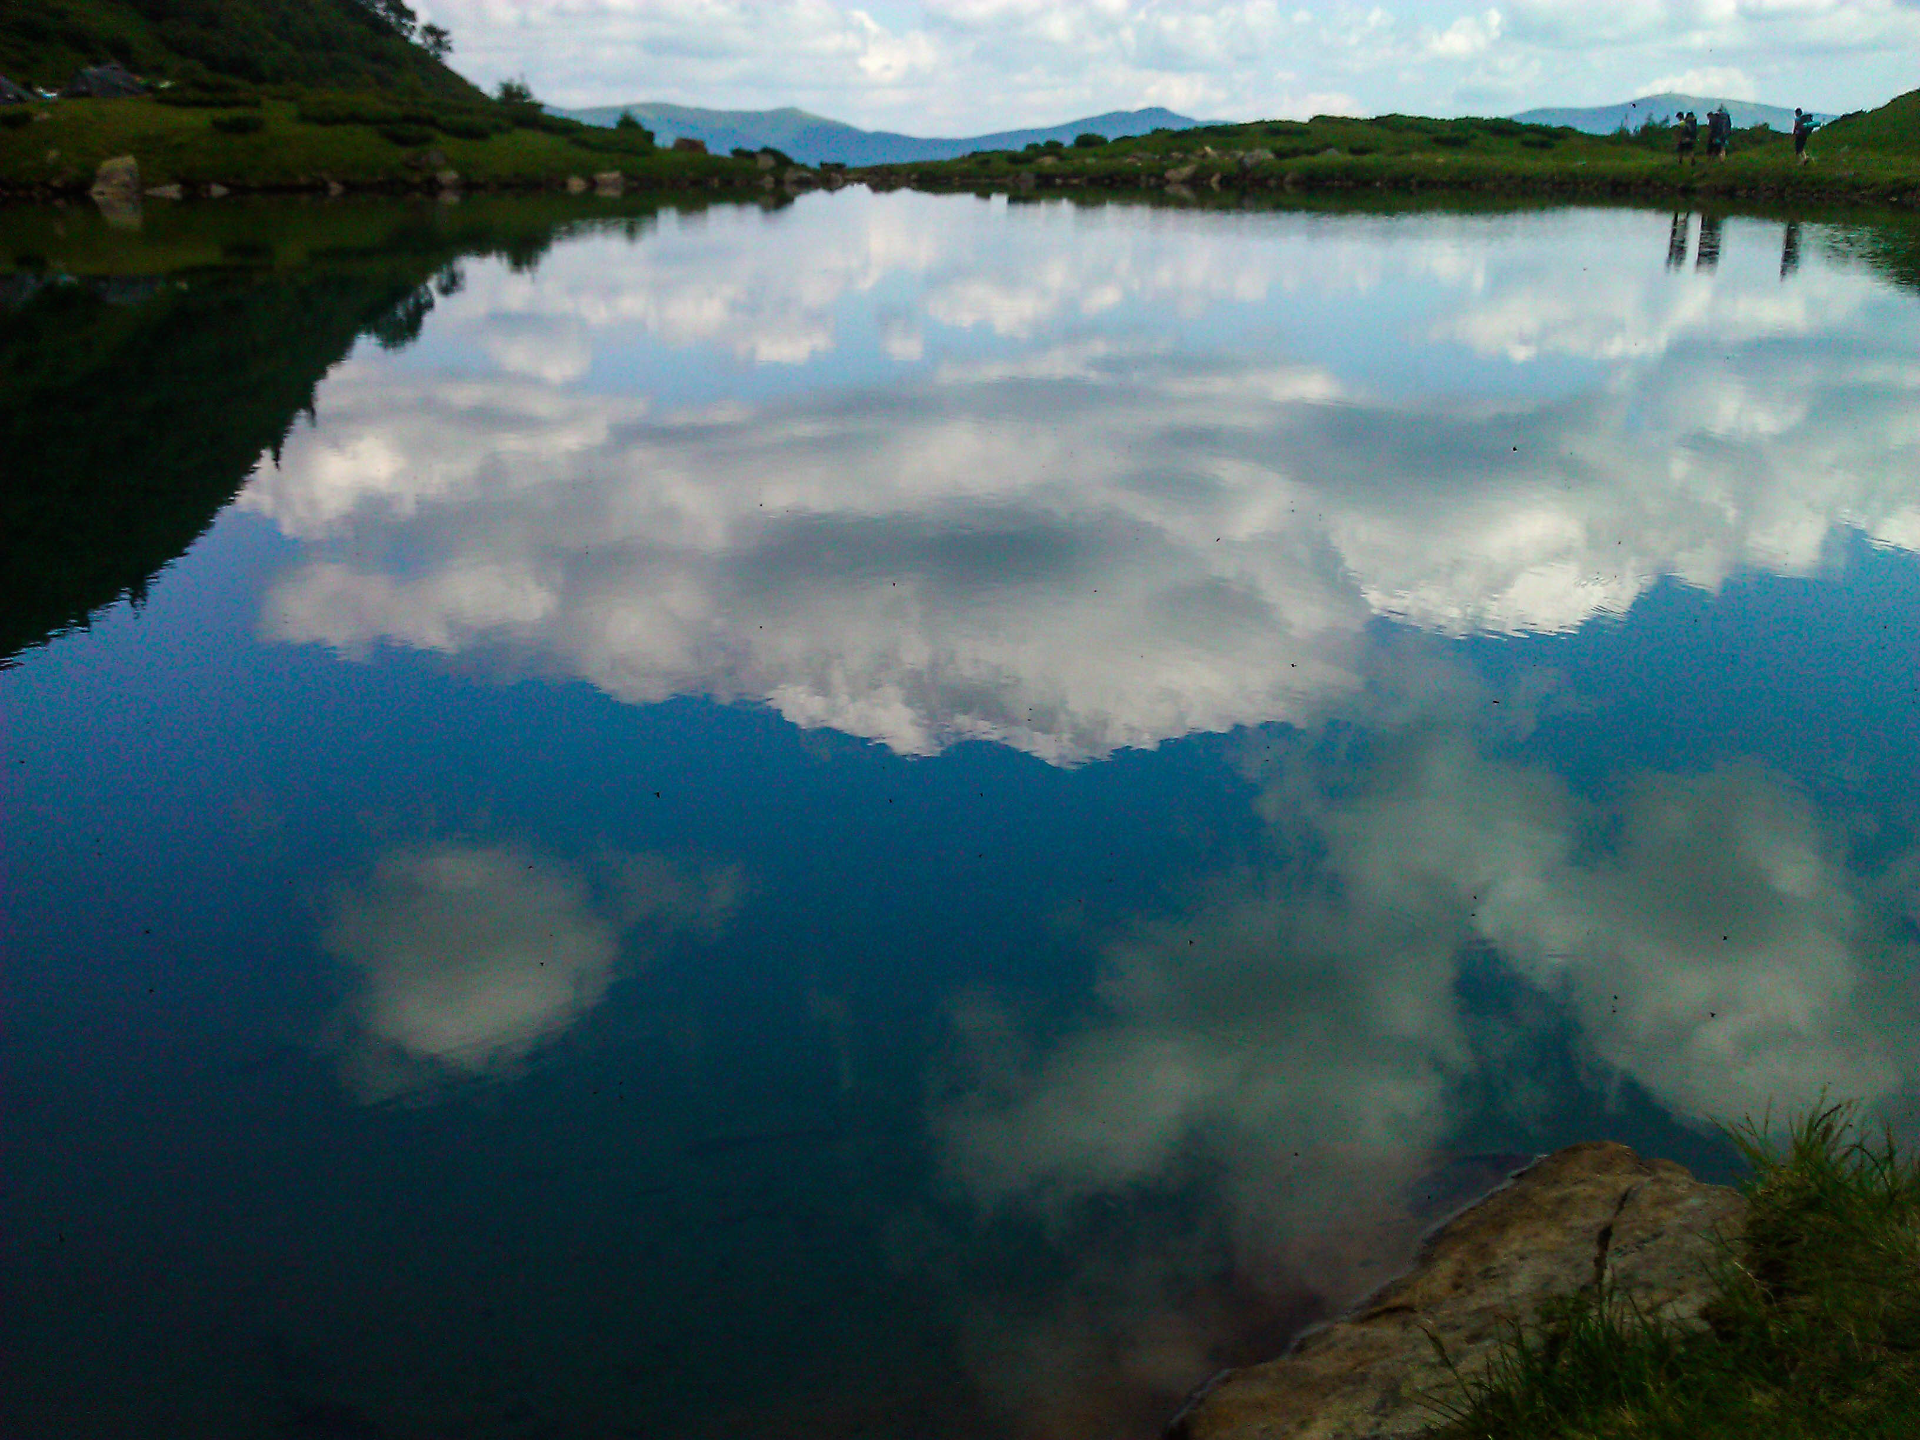 Clouds are reflected in the water mirror